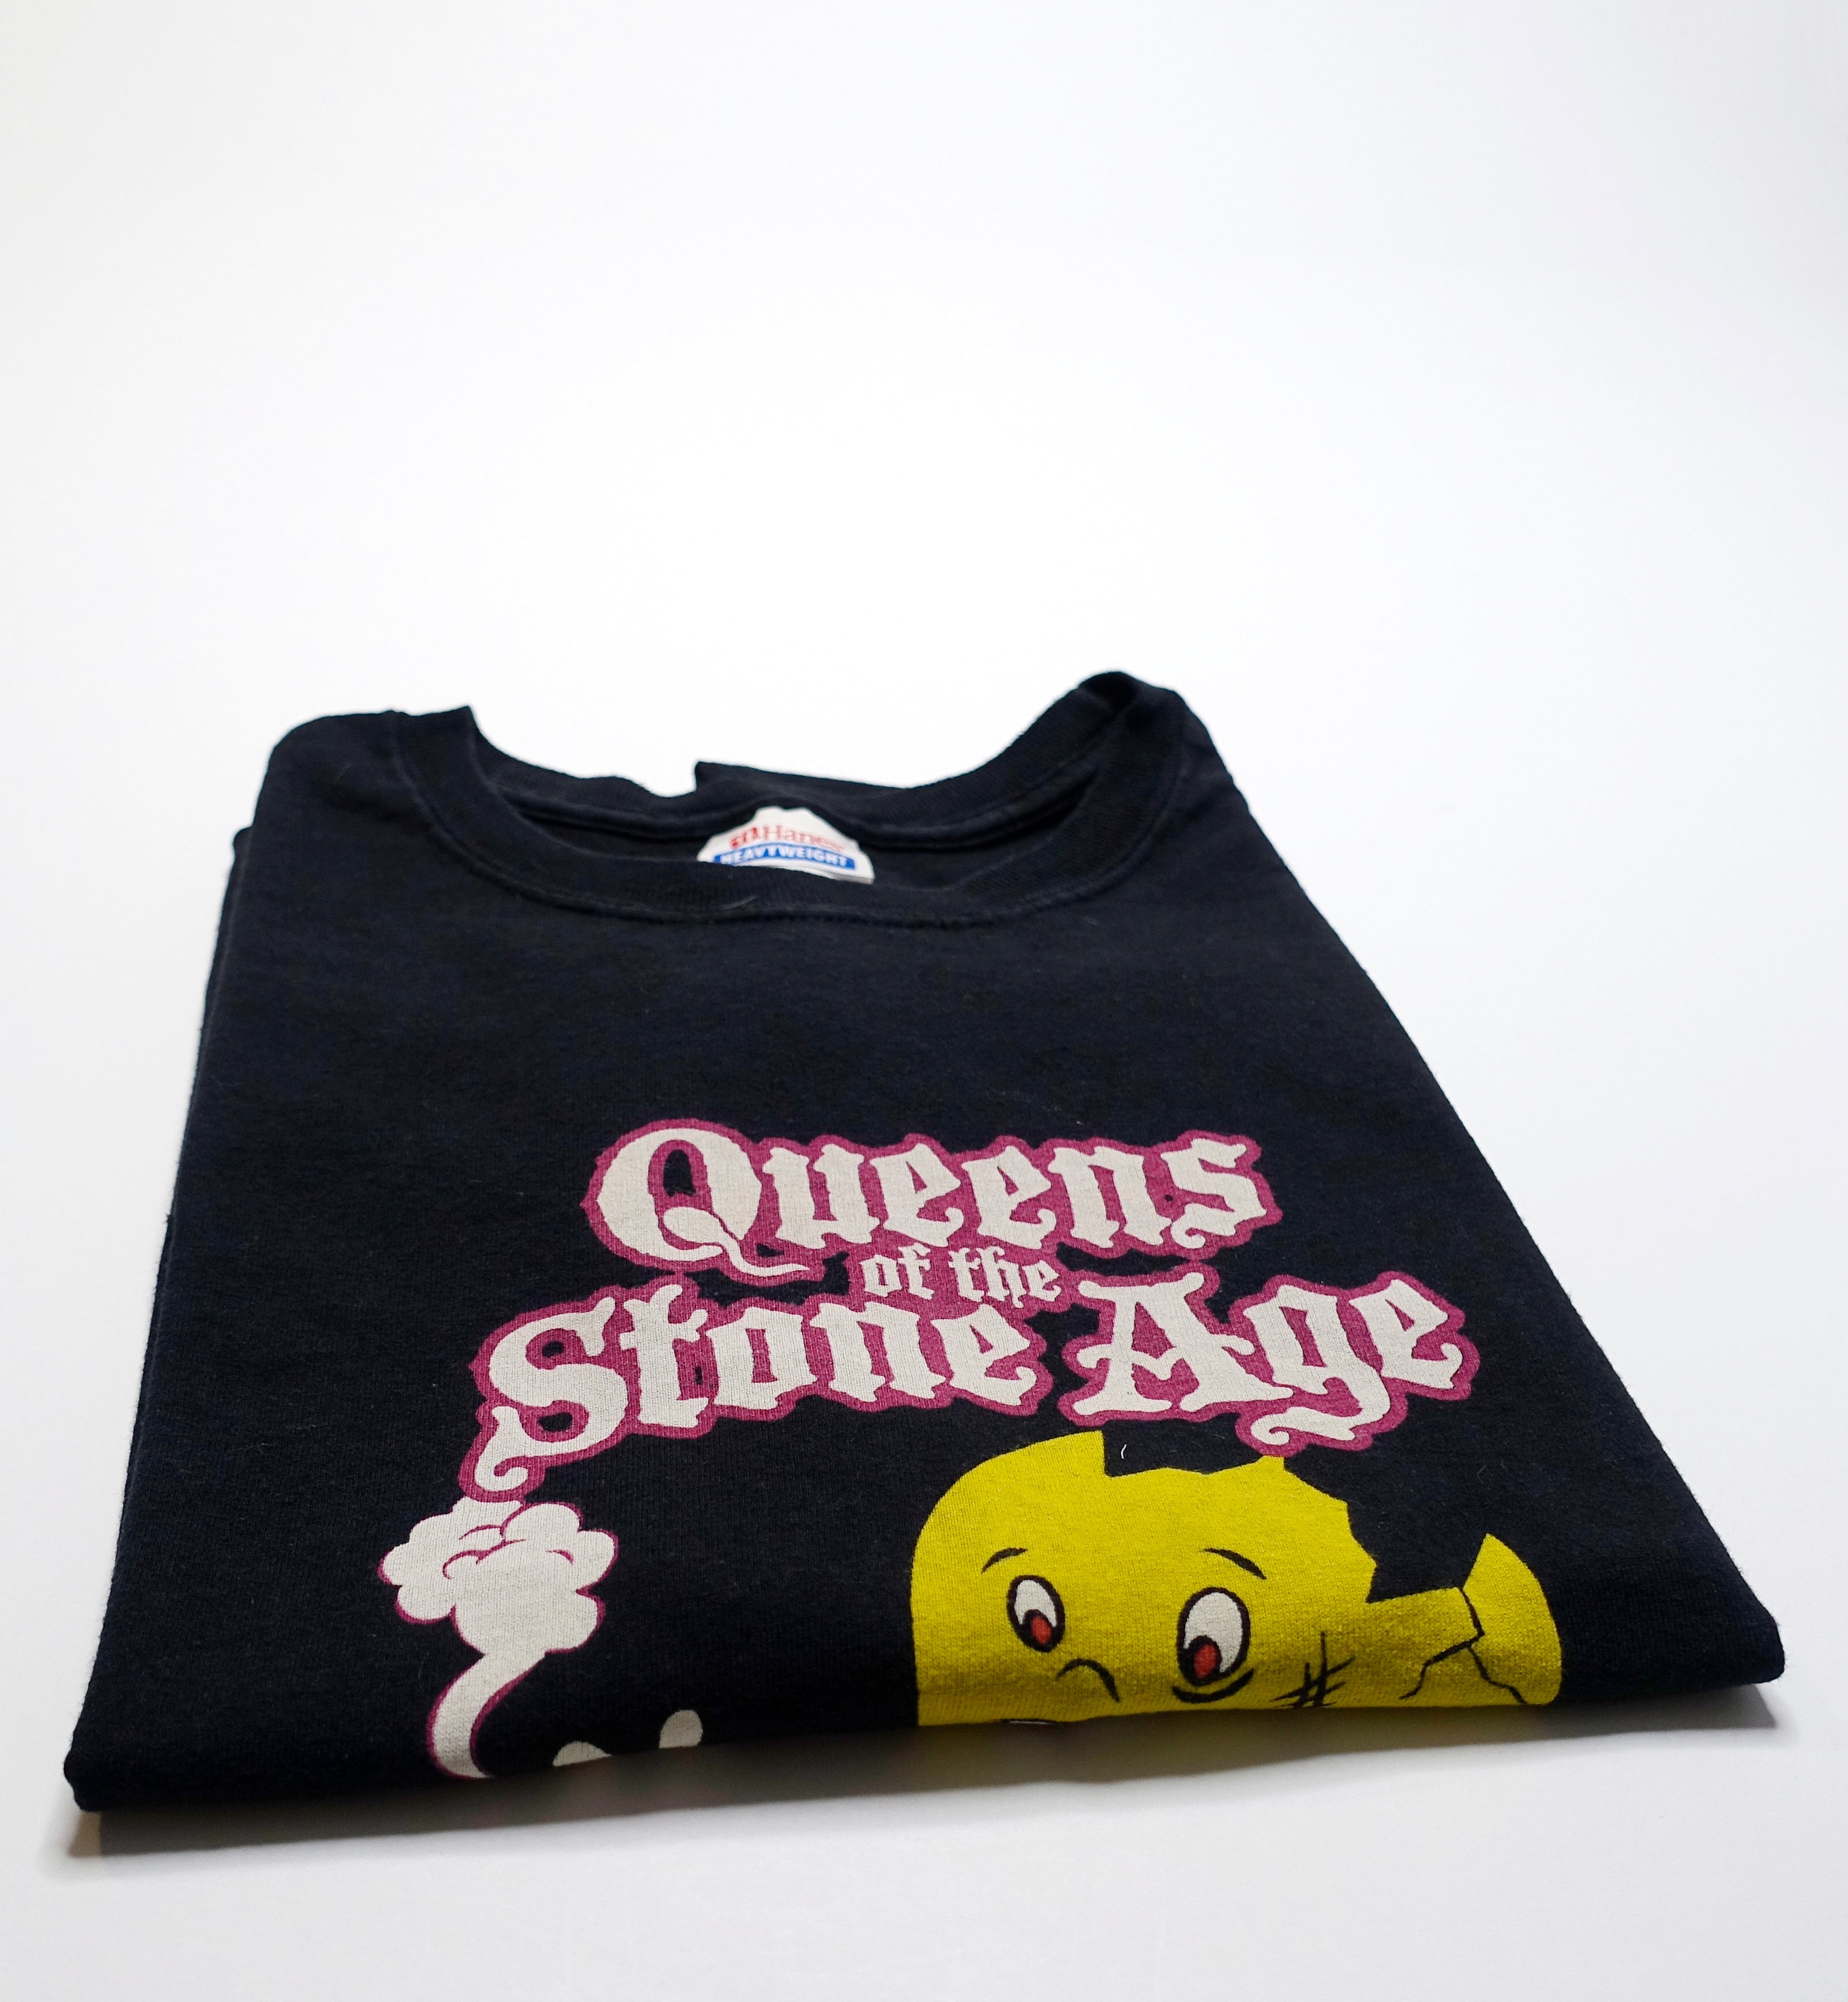 Queens Of The Stone Age – Era Vulgaris  2007 Tour Shirt Size Large